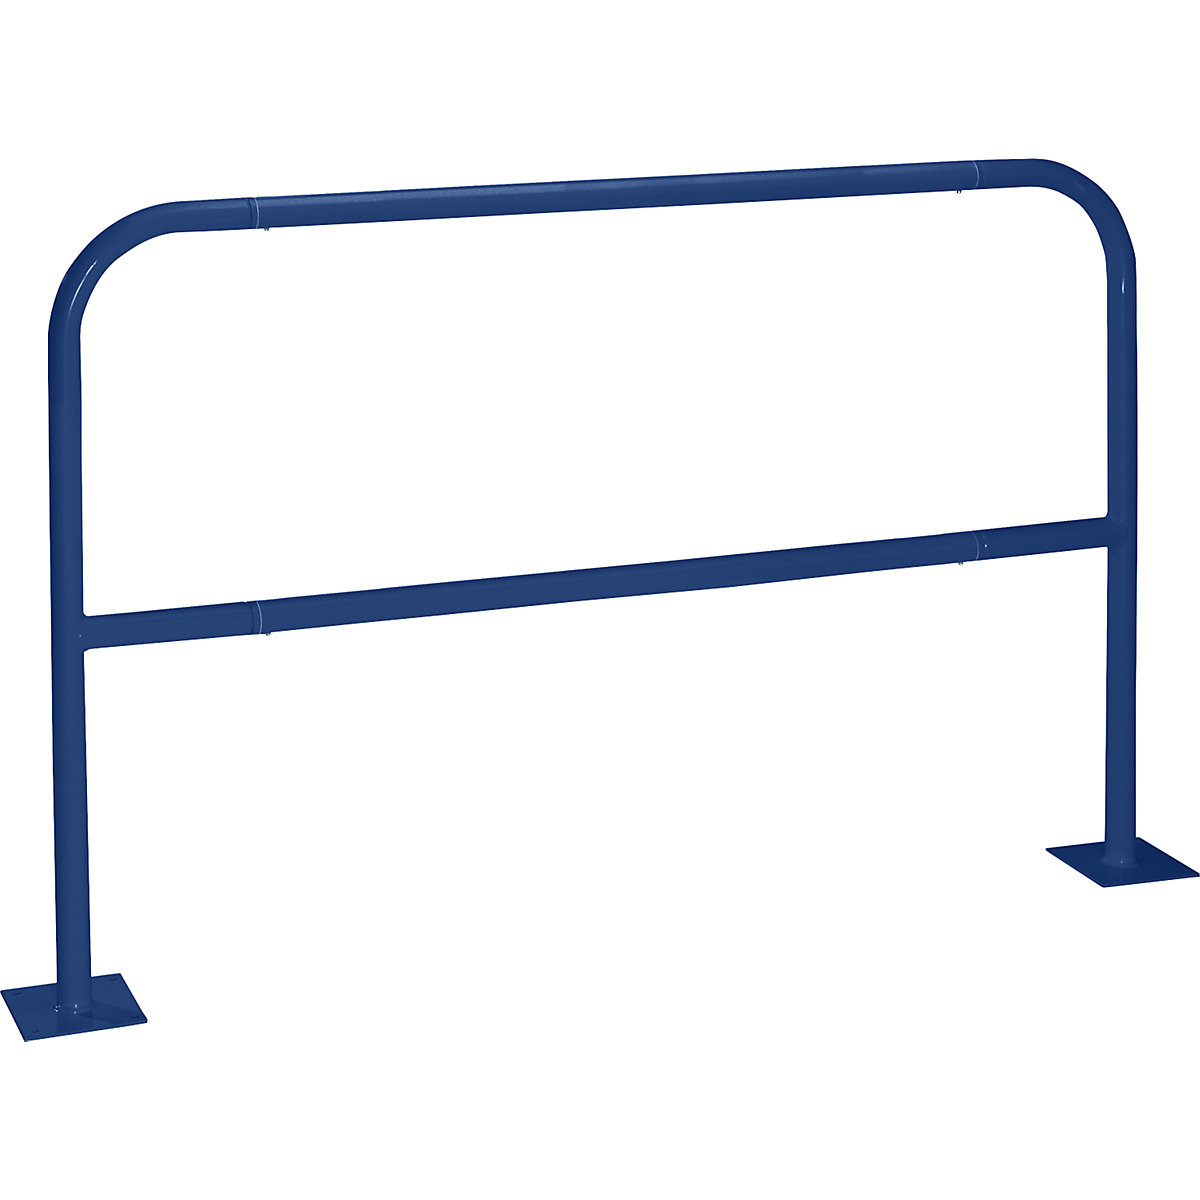 Safety rail for danger zones, to bolt in place, cobalt blue RAL 5013, width 1500 mm-16